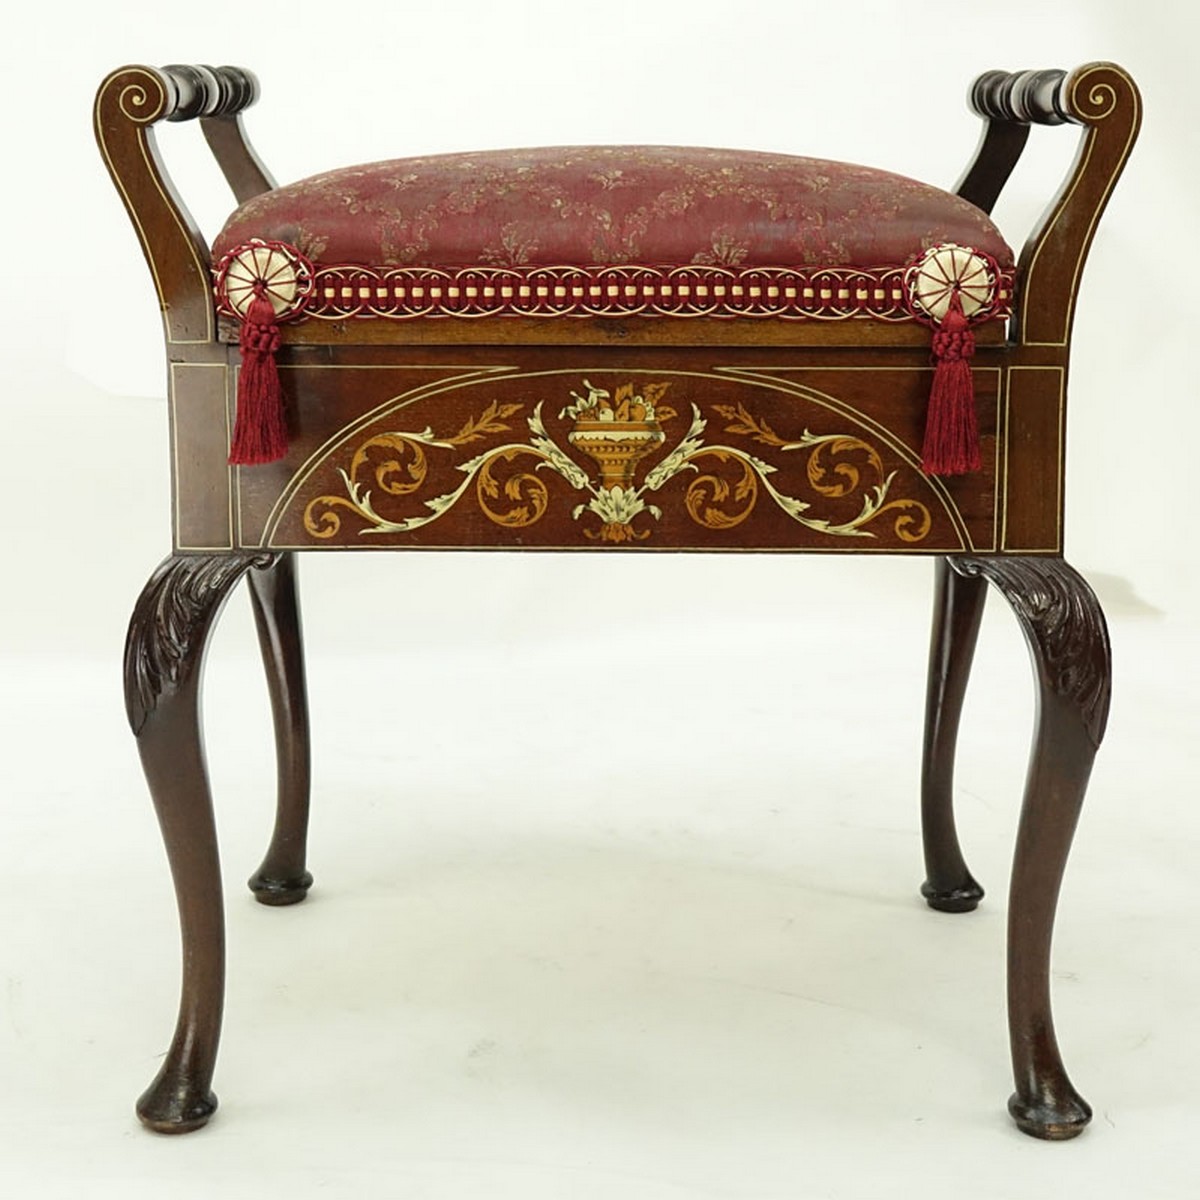 Antique Queen Anne Style Painted and Inlaid Upholstered Bench. Rubbing to varnish, split to wood on one side, light scratches to wood.